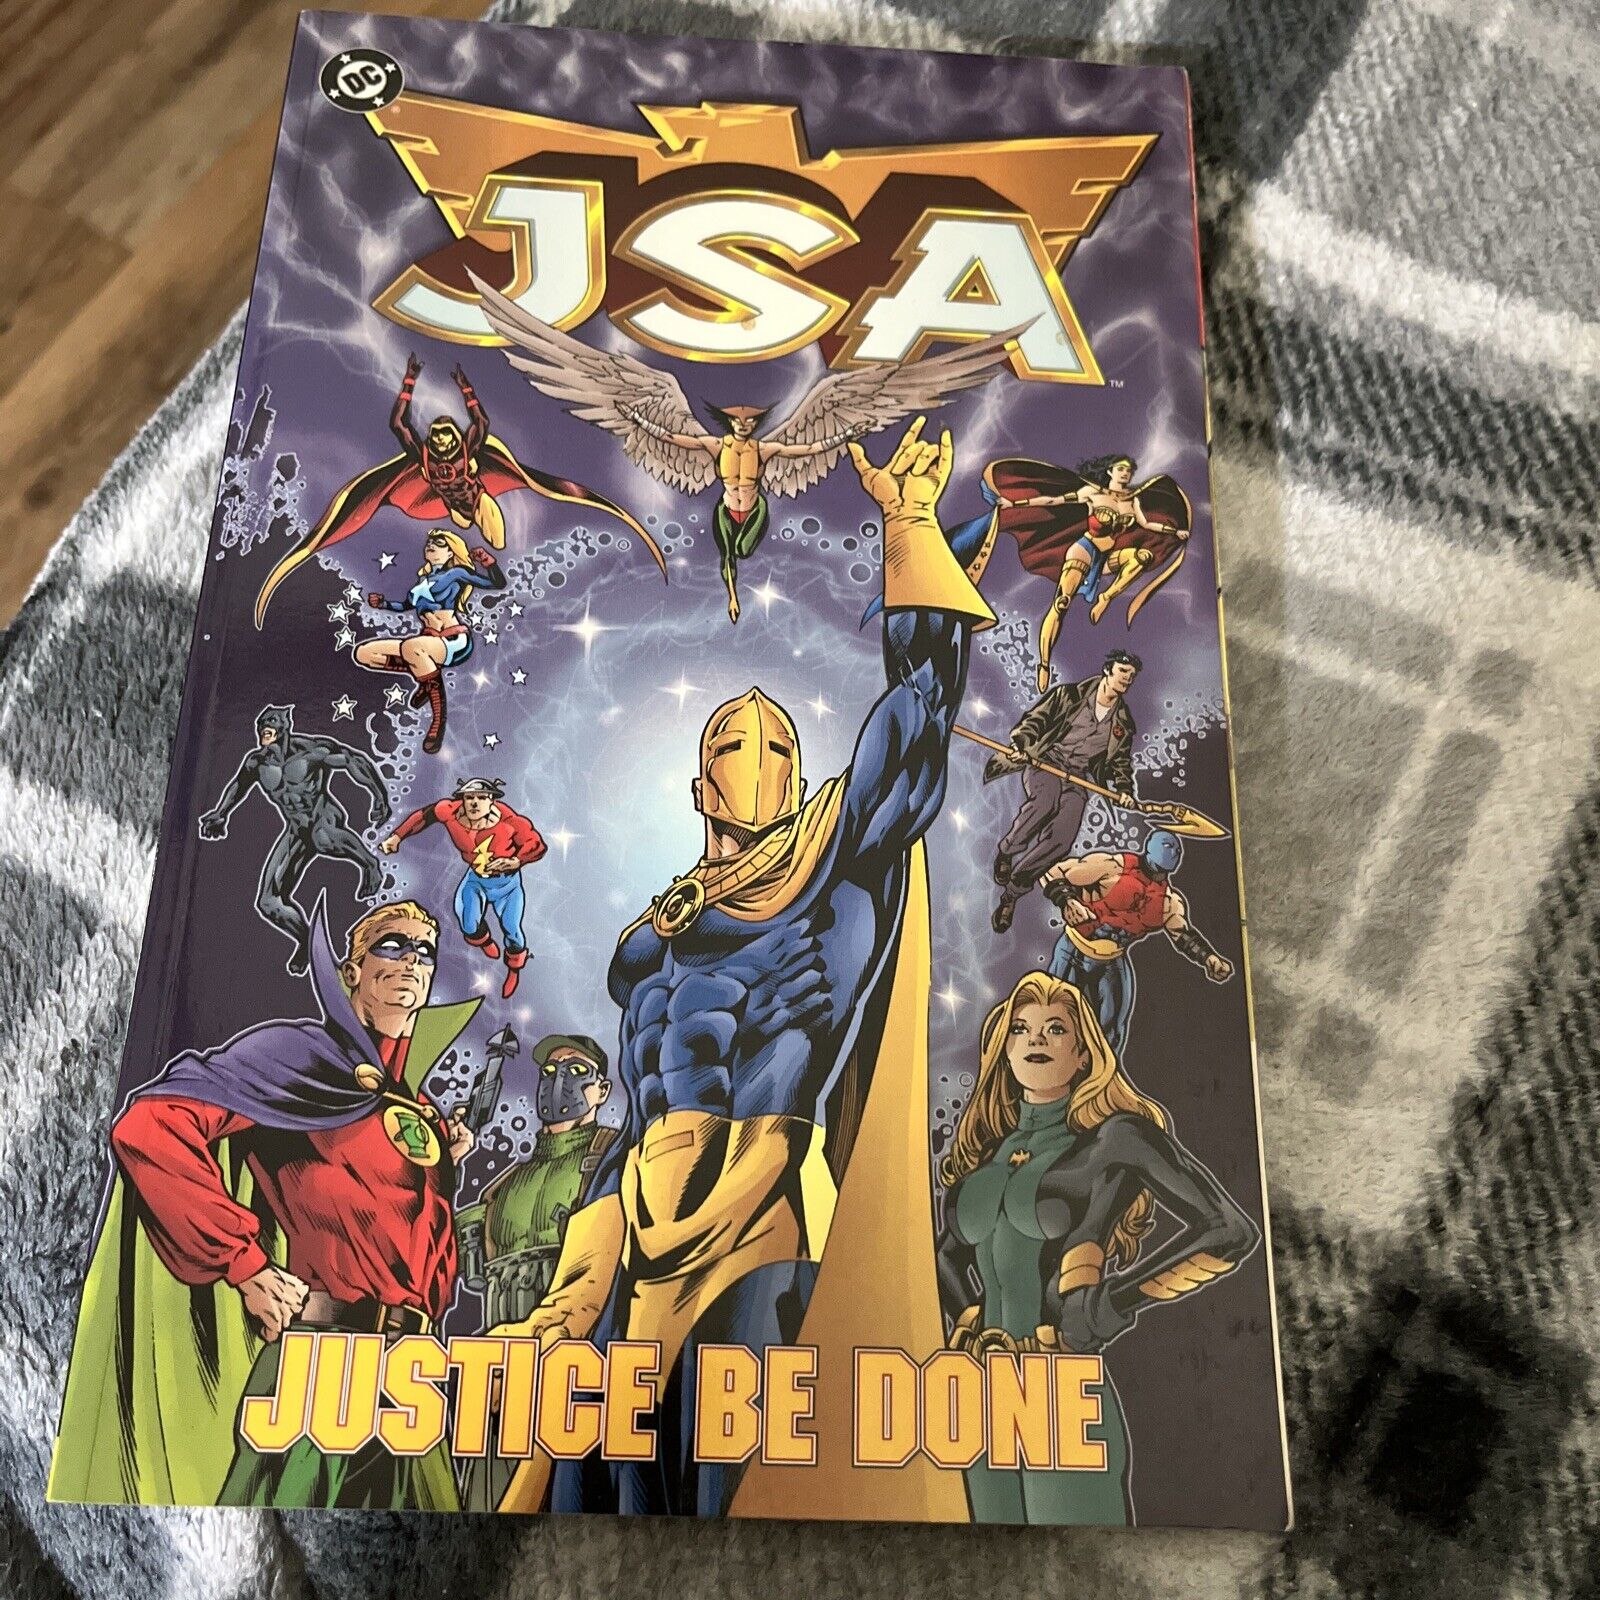 DC Comic Novel: Justice Be Done - JSA (Justice Society of America) 2000 Vol. 1